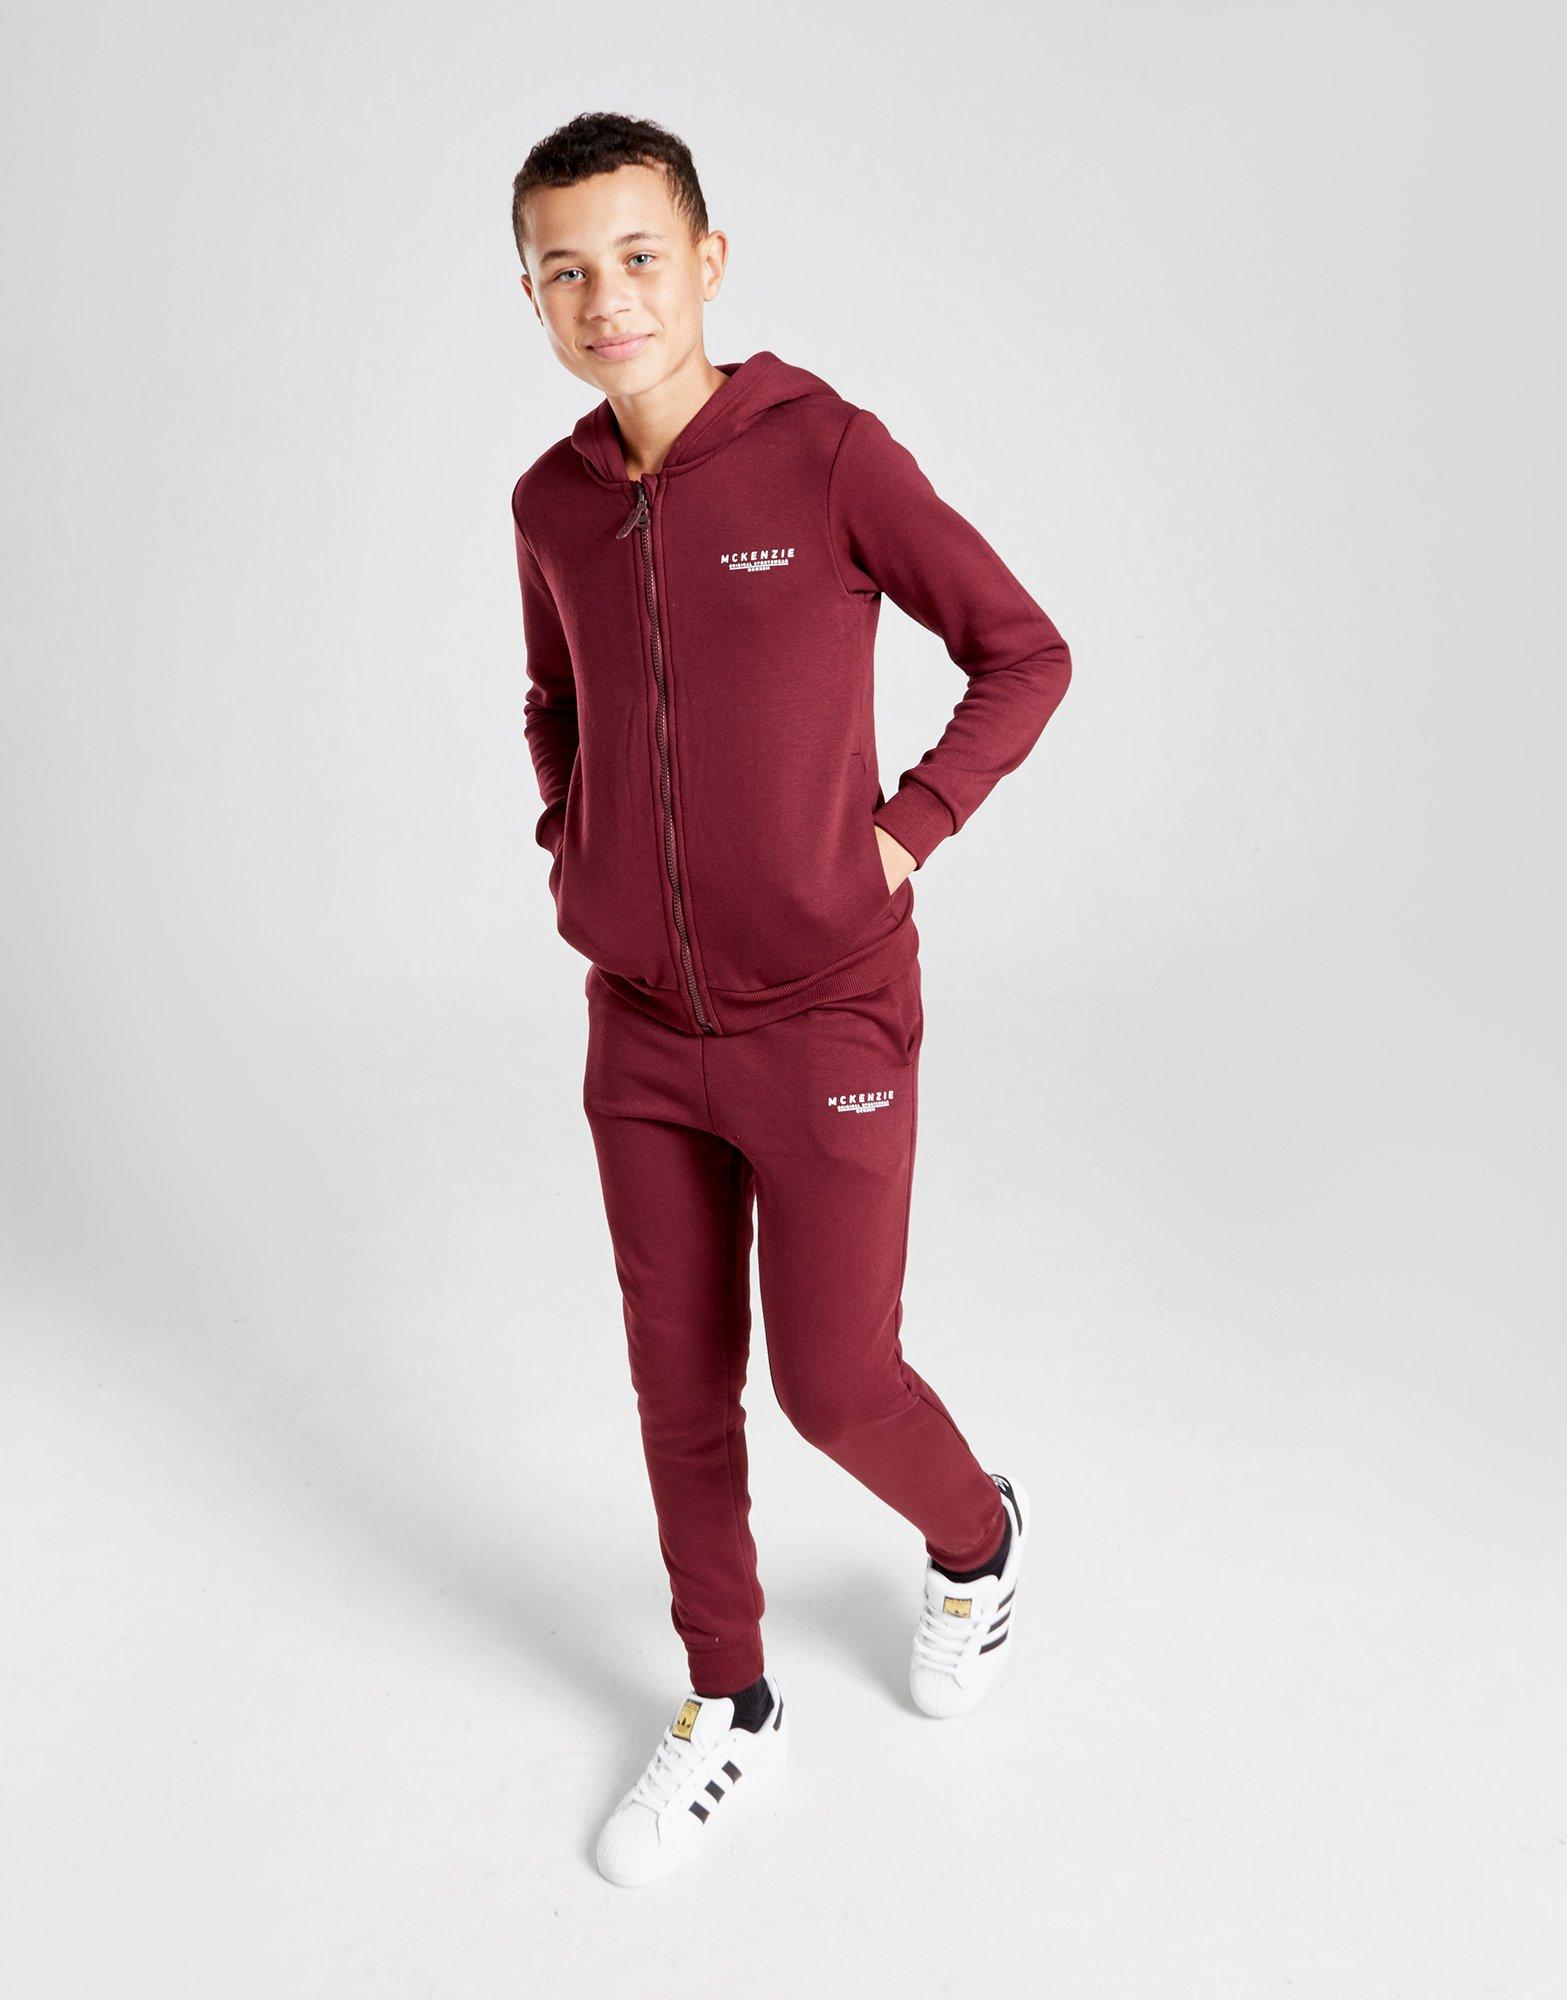 junior north face track pants